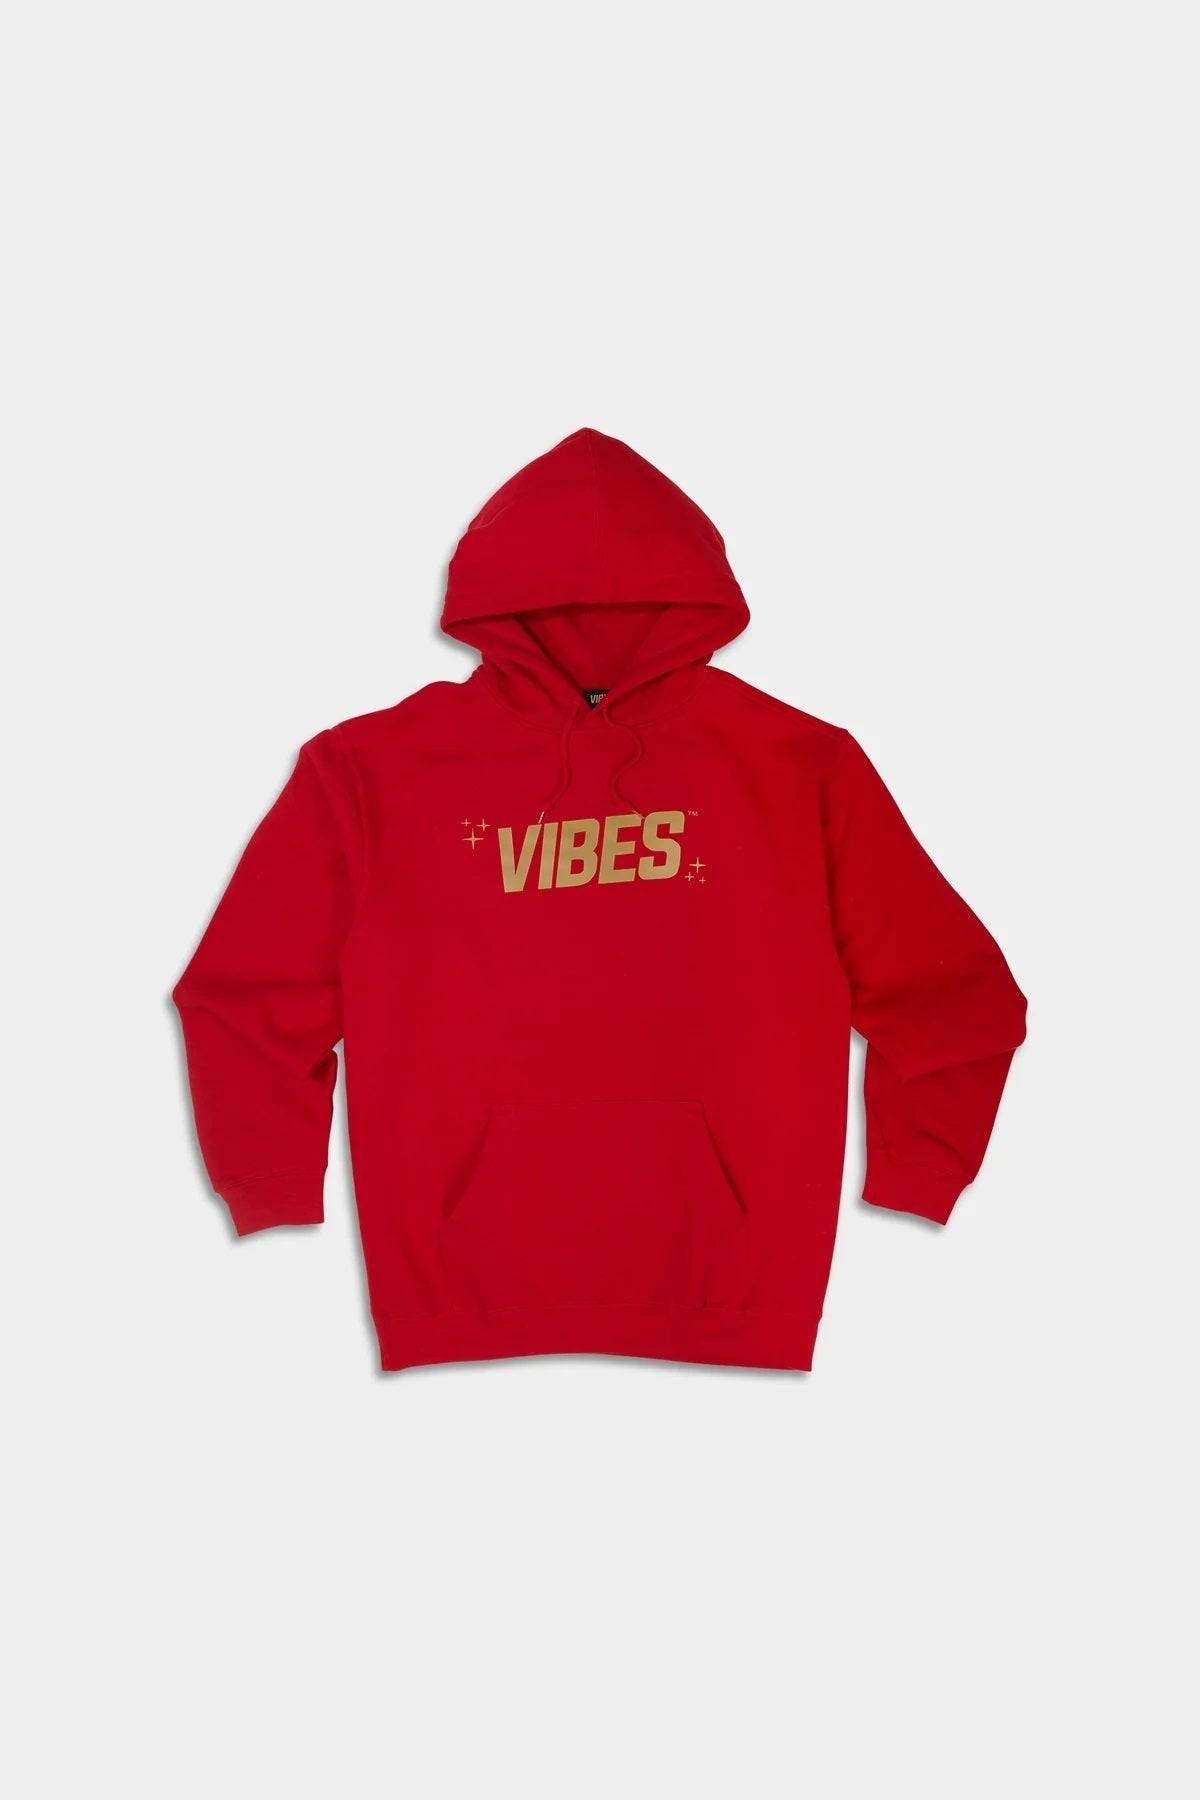 VIBES Red With Gold Logo Hoodie Medium